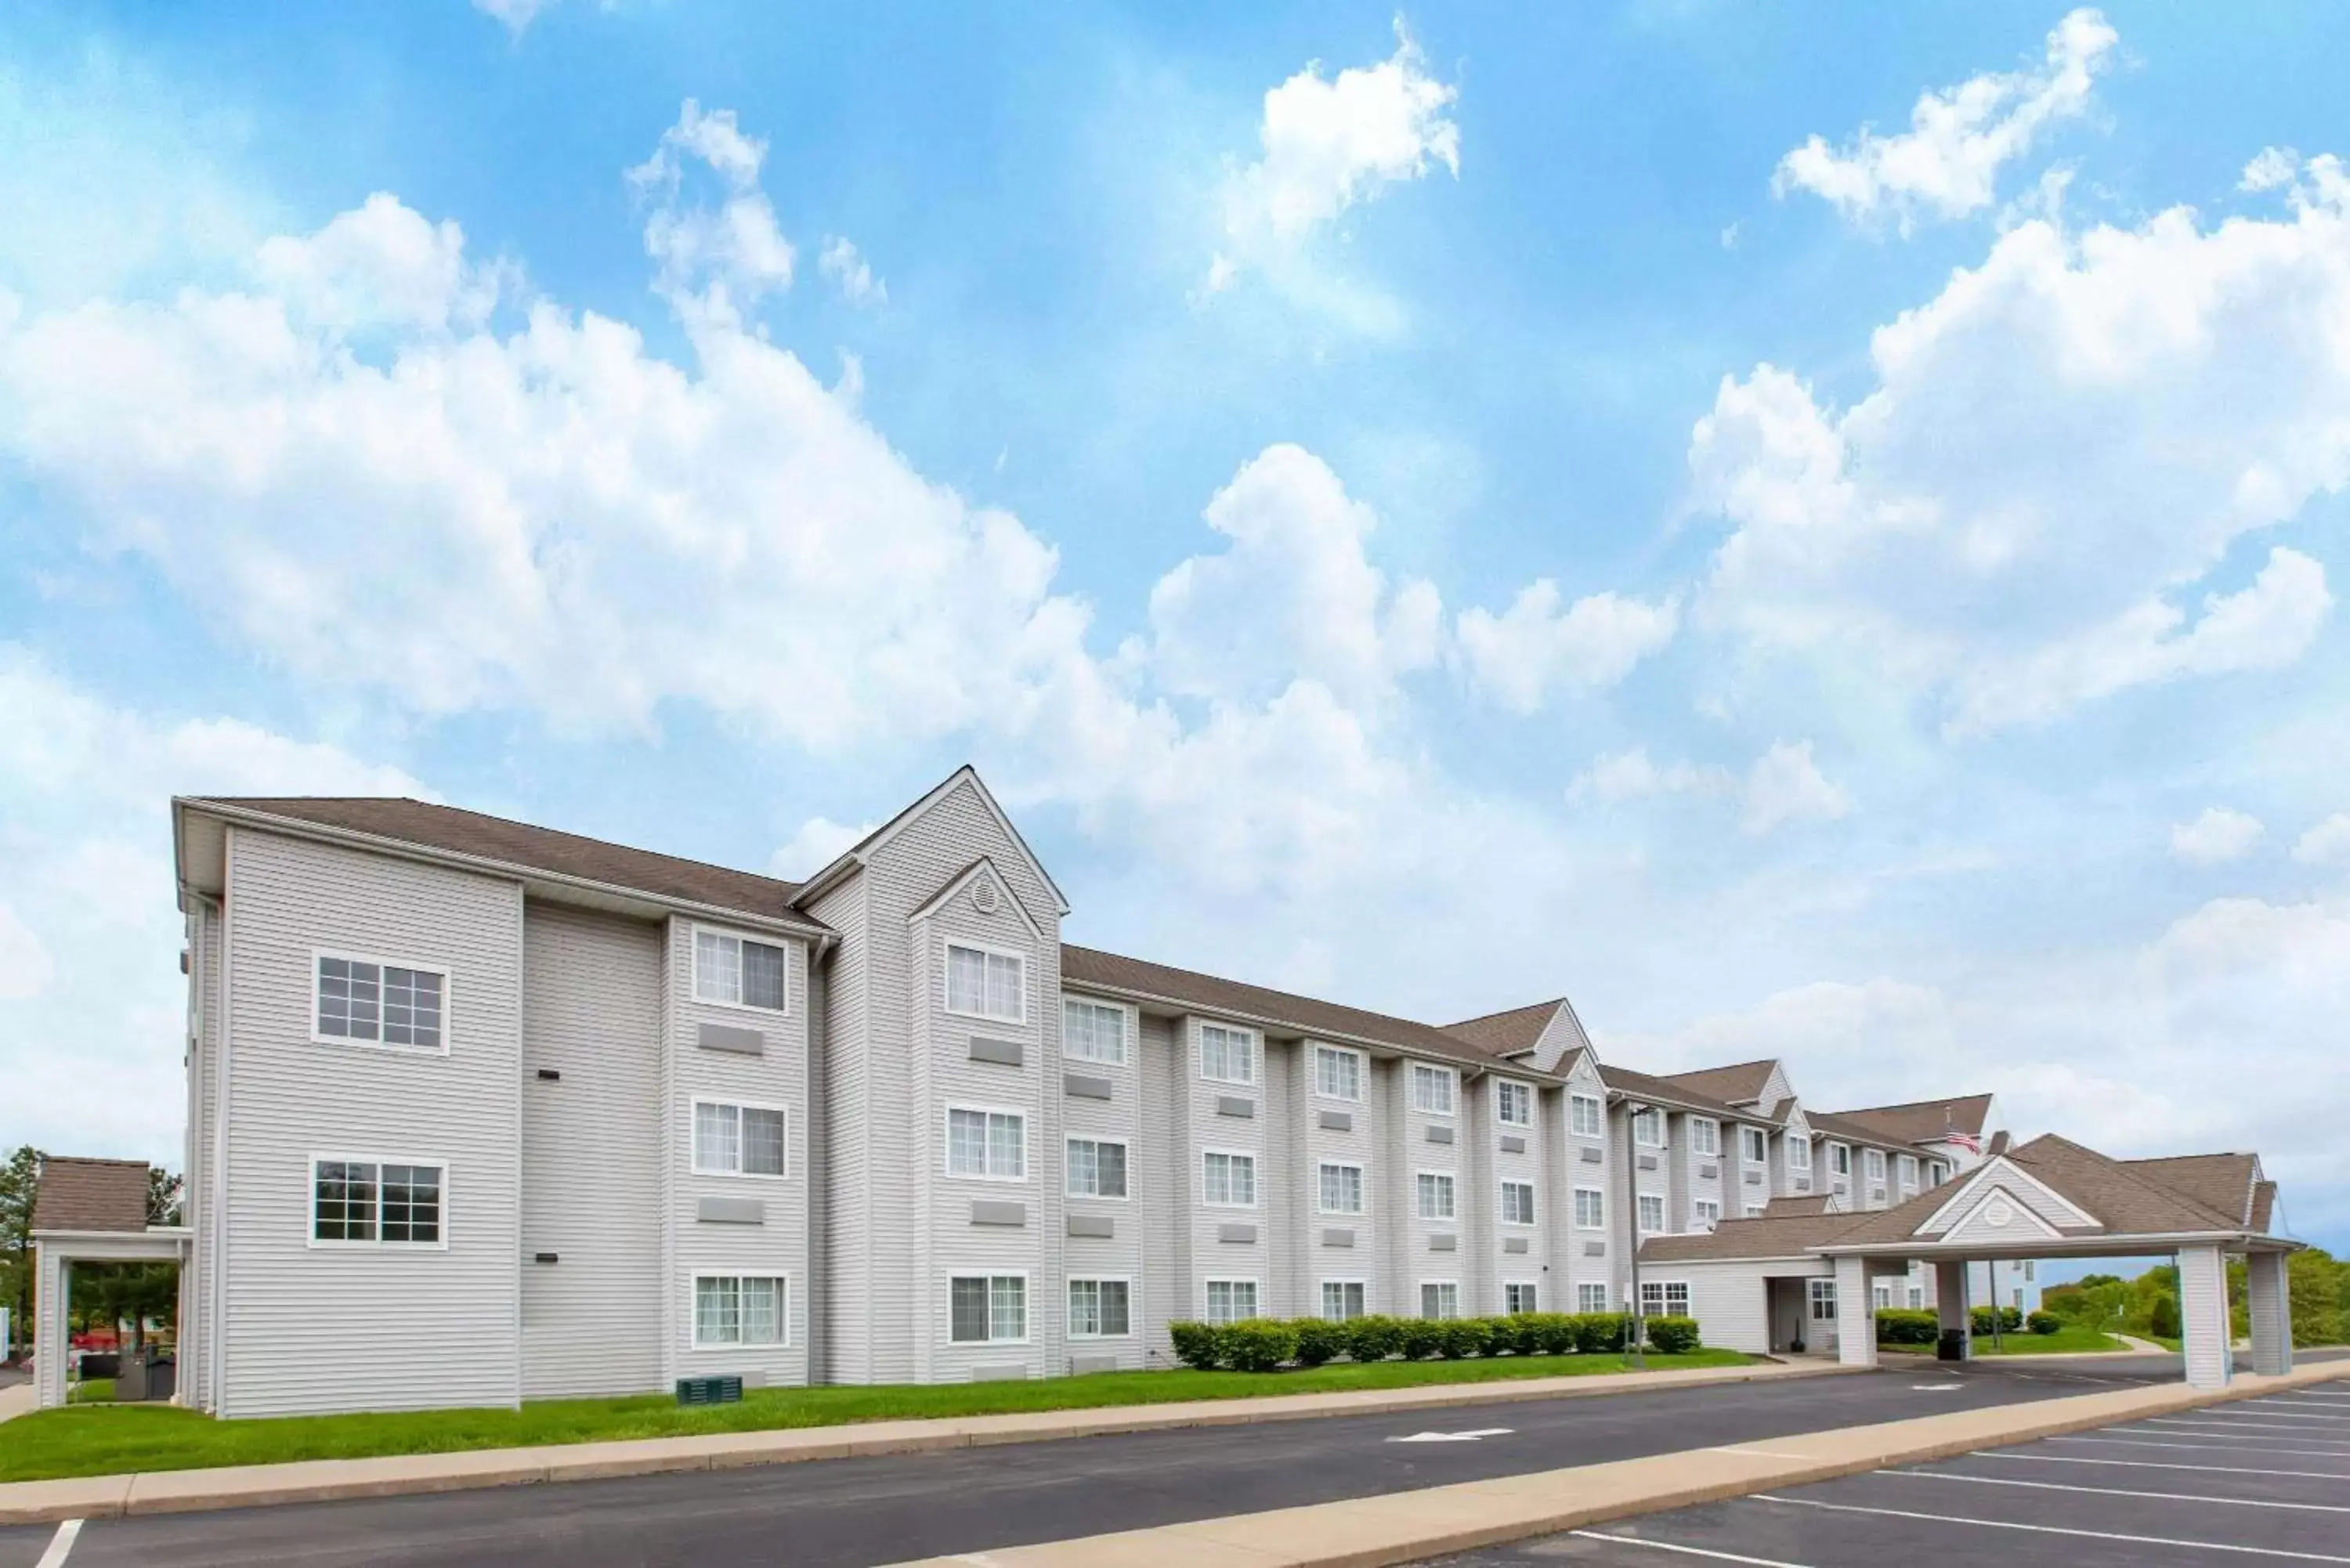 Property Building in Microtel Inn & Suites by Wyndham Pittsburgh Airport